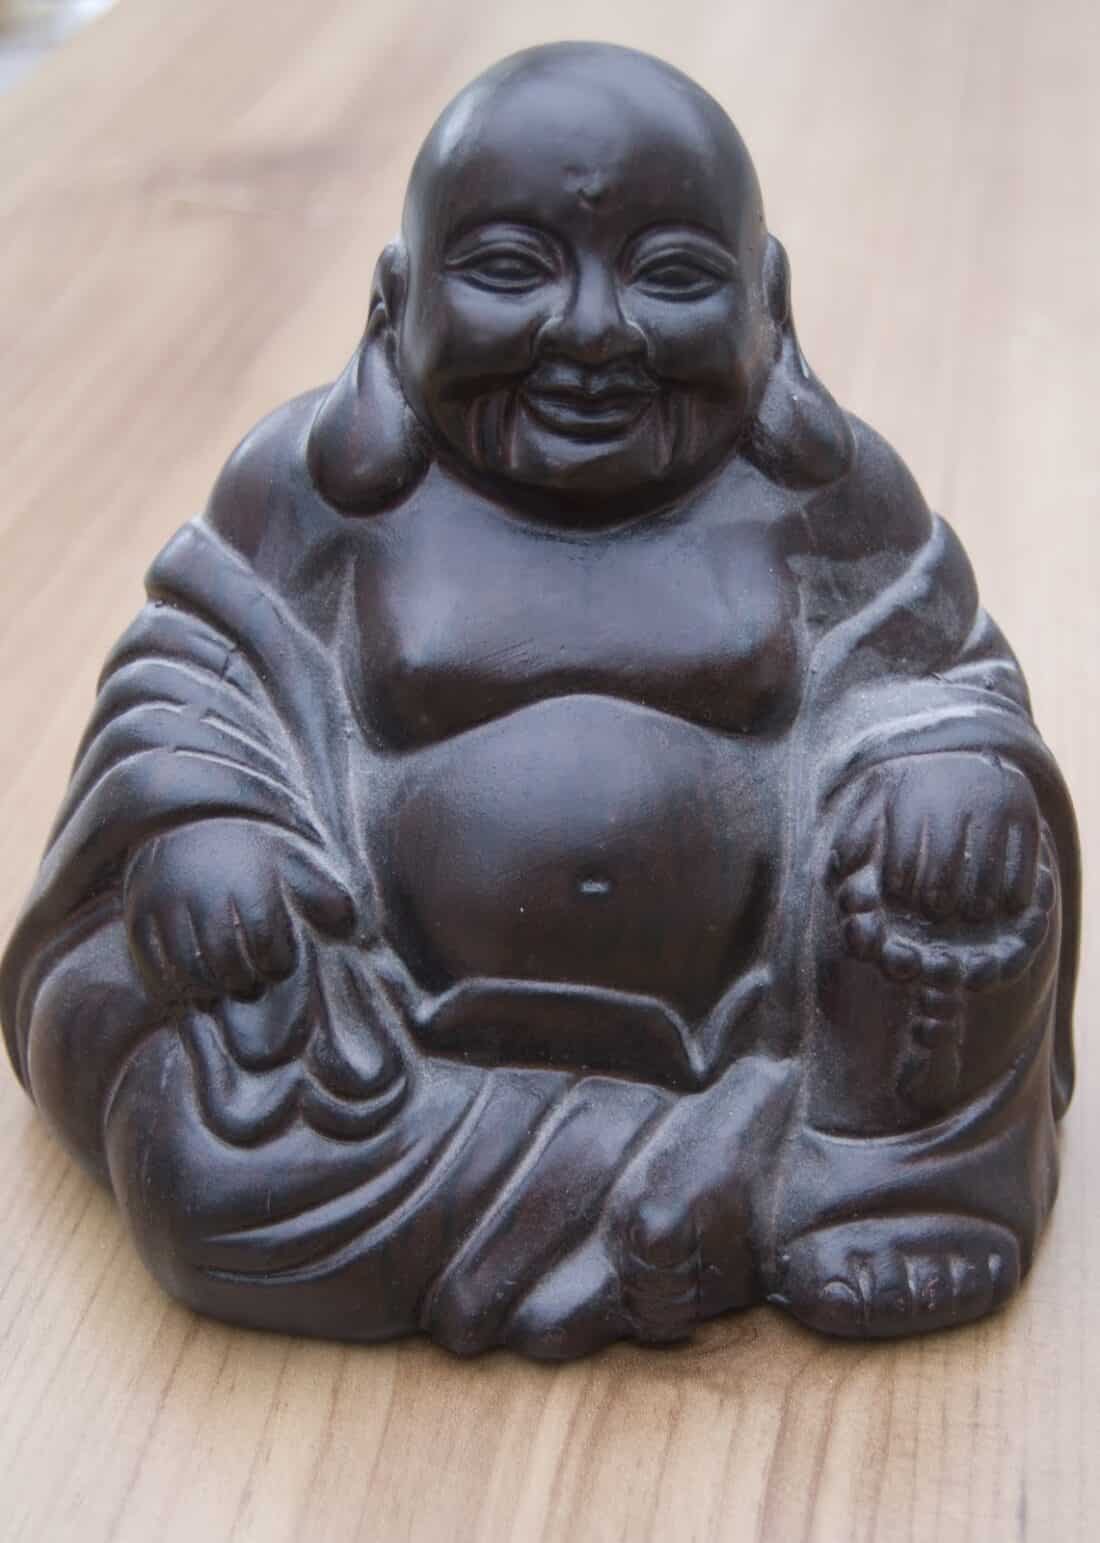 A statue of a smiling buddha.